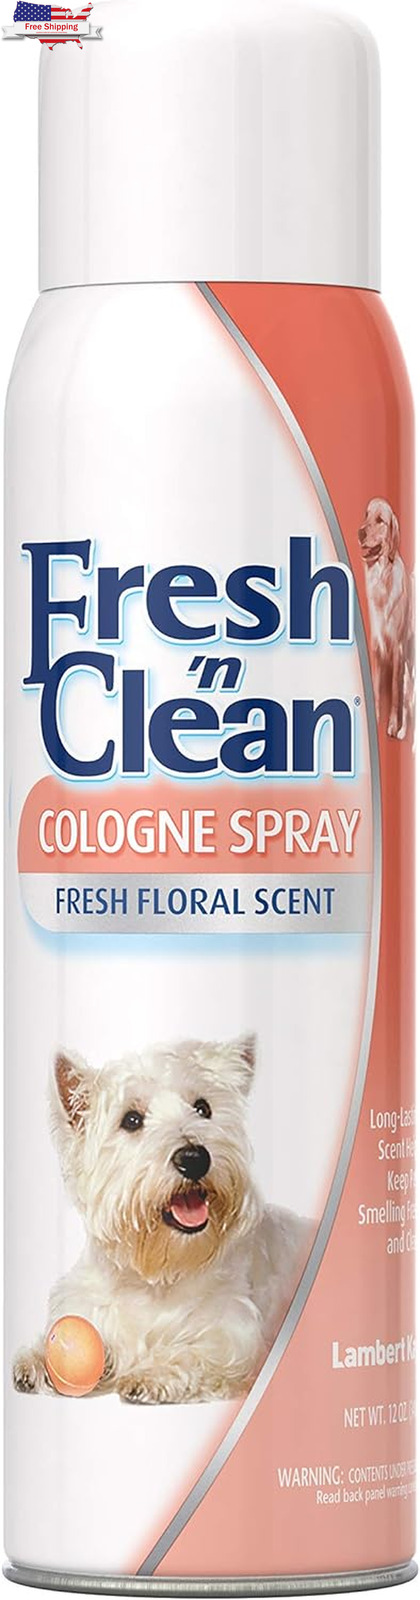 Fresh \'N Clean Cologne Spray - Fresh Floral Scent - 12 Ounce ⭐⭐⭐⭐⭐